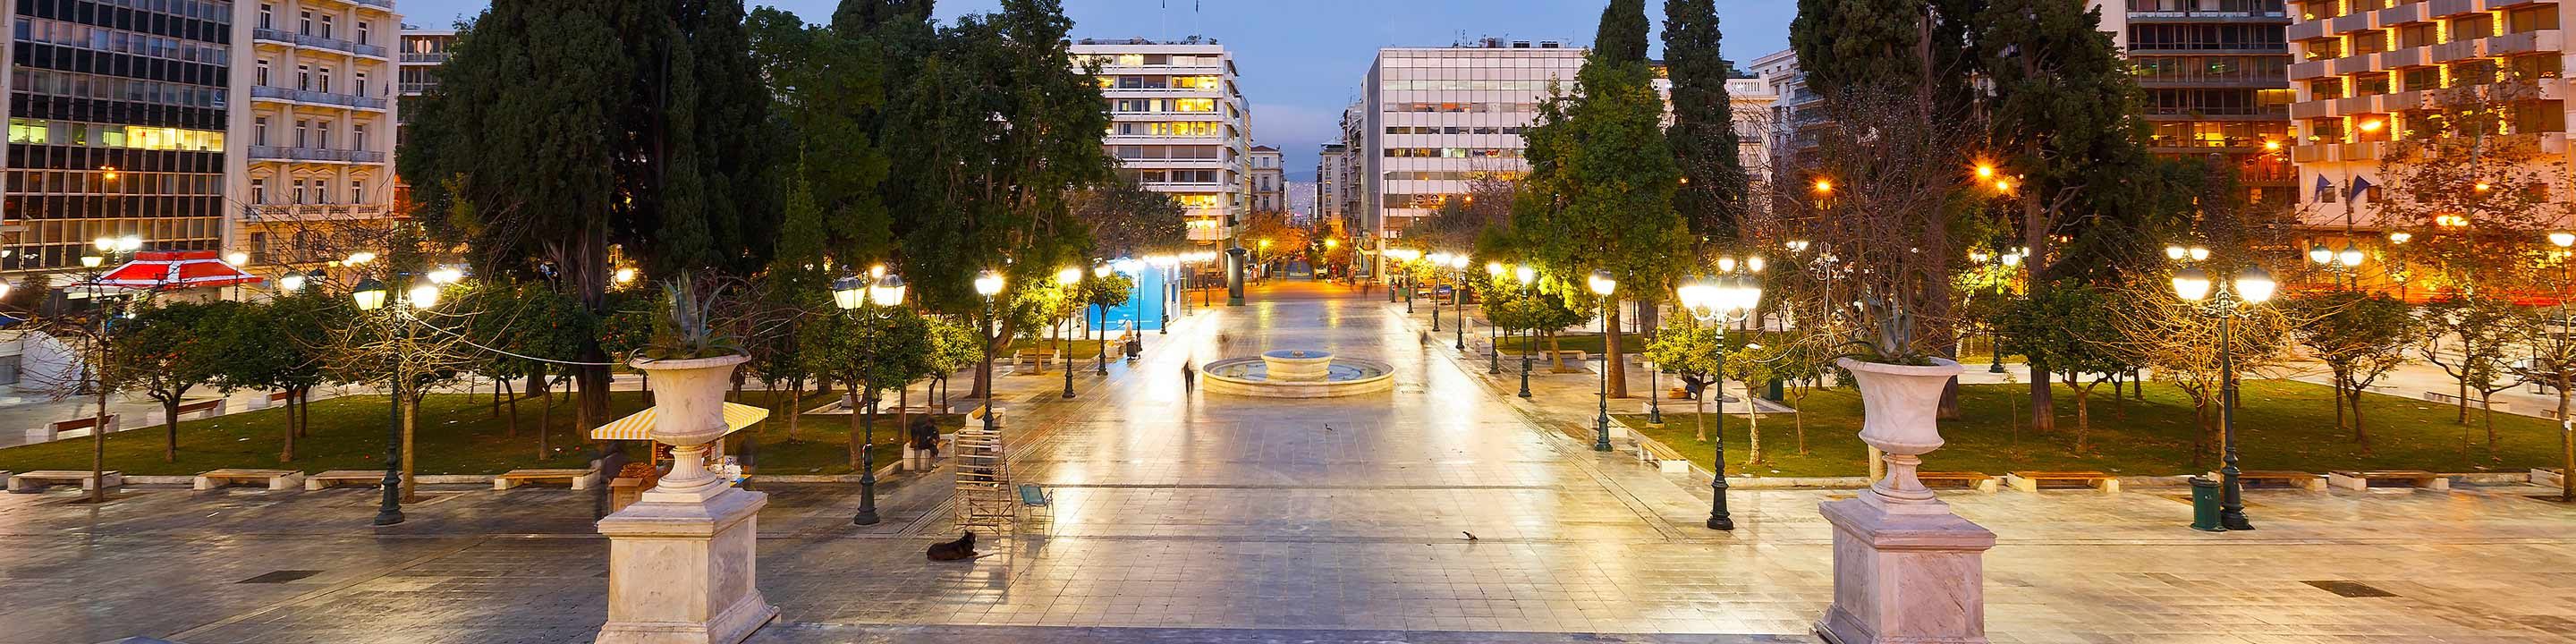 Syntagma Square in Athens